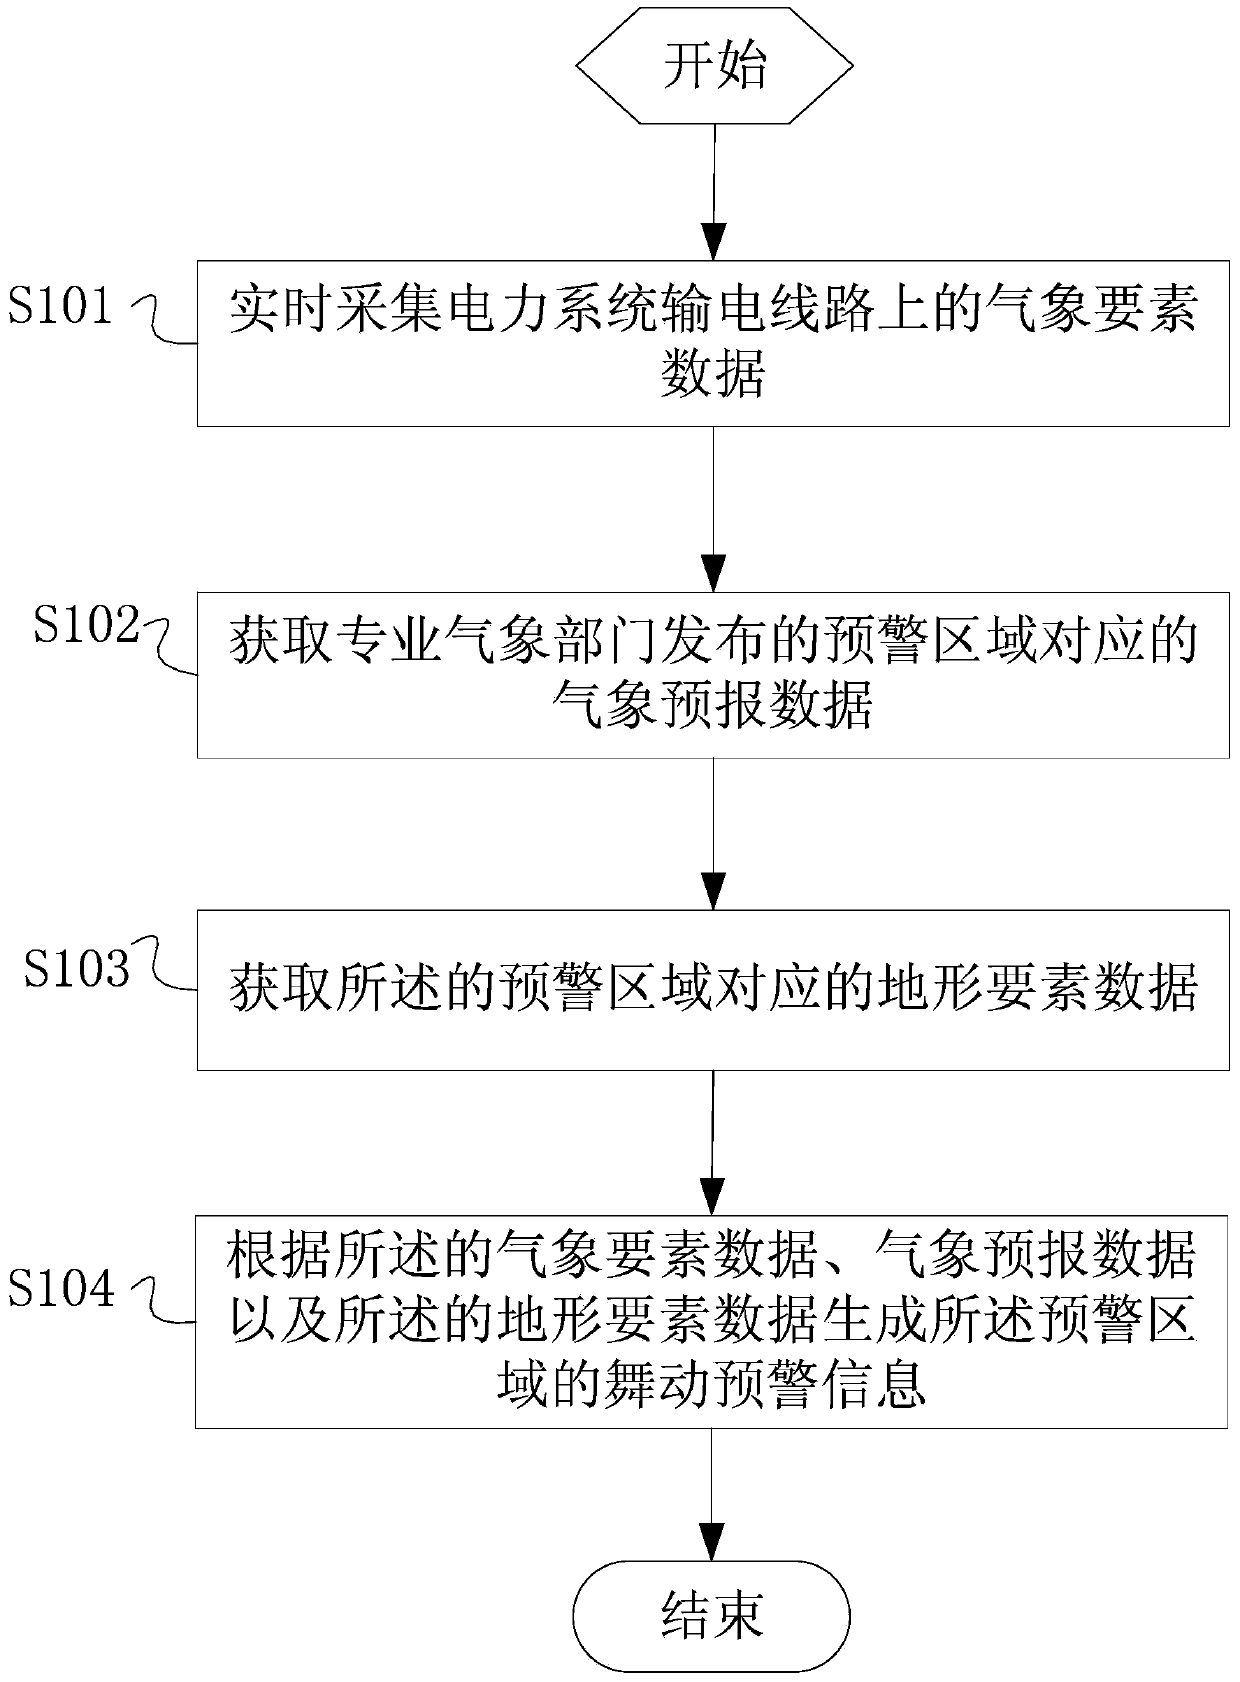 Gallop warning method and system based on electric transmission line of electrical power system